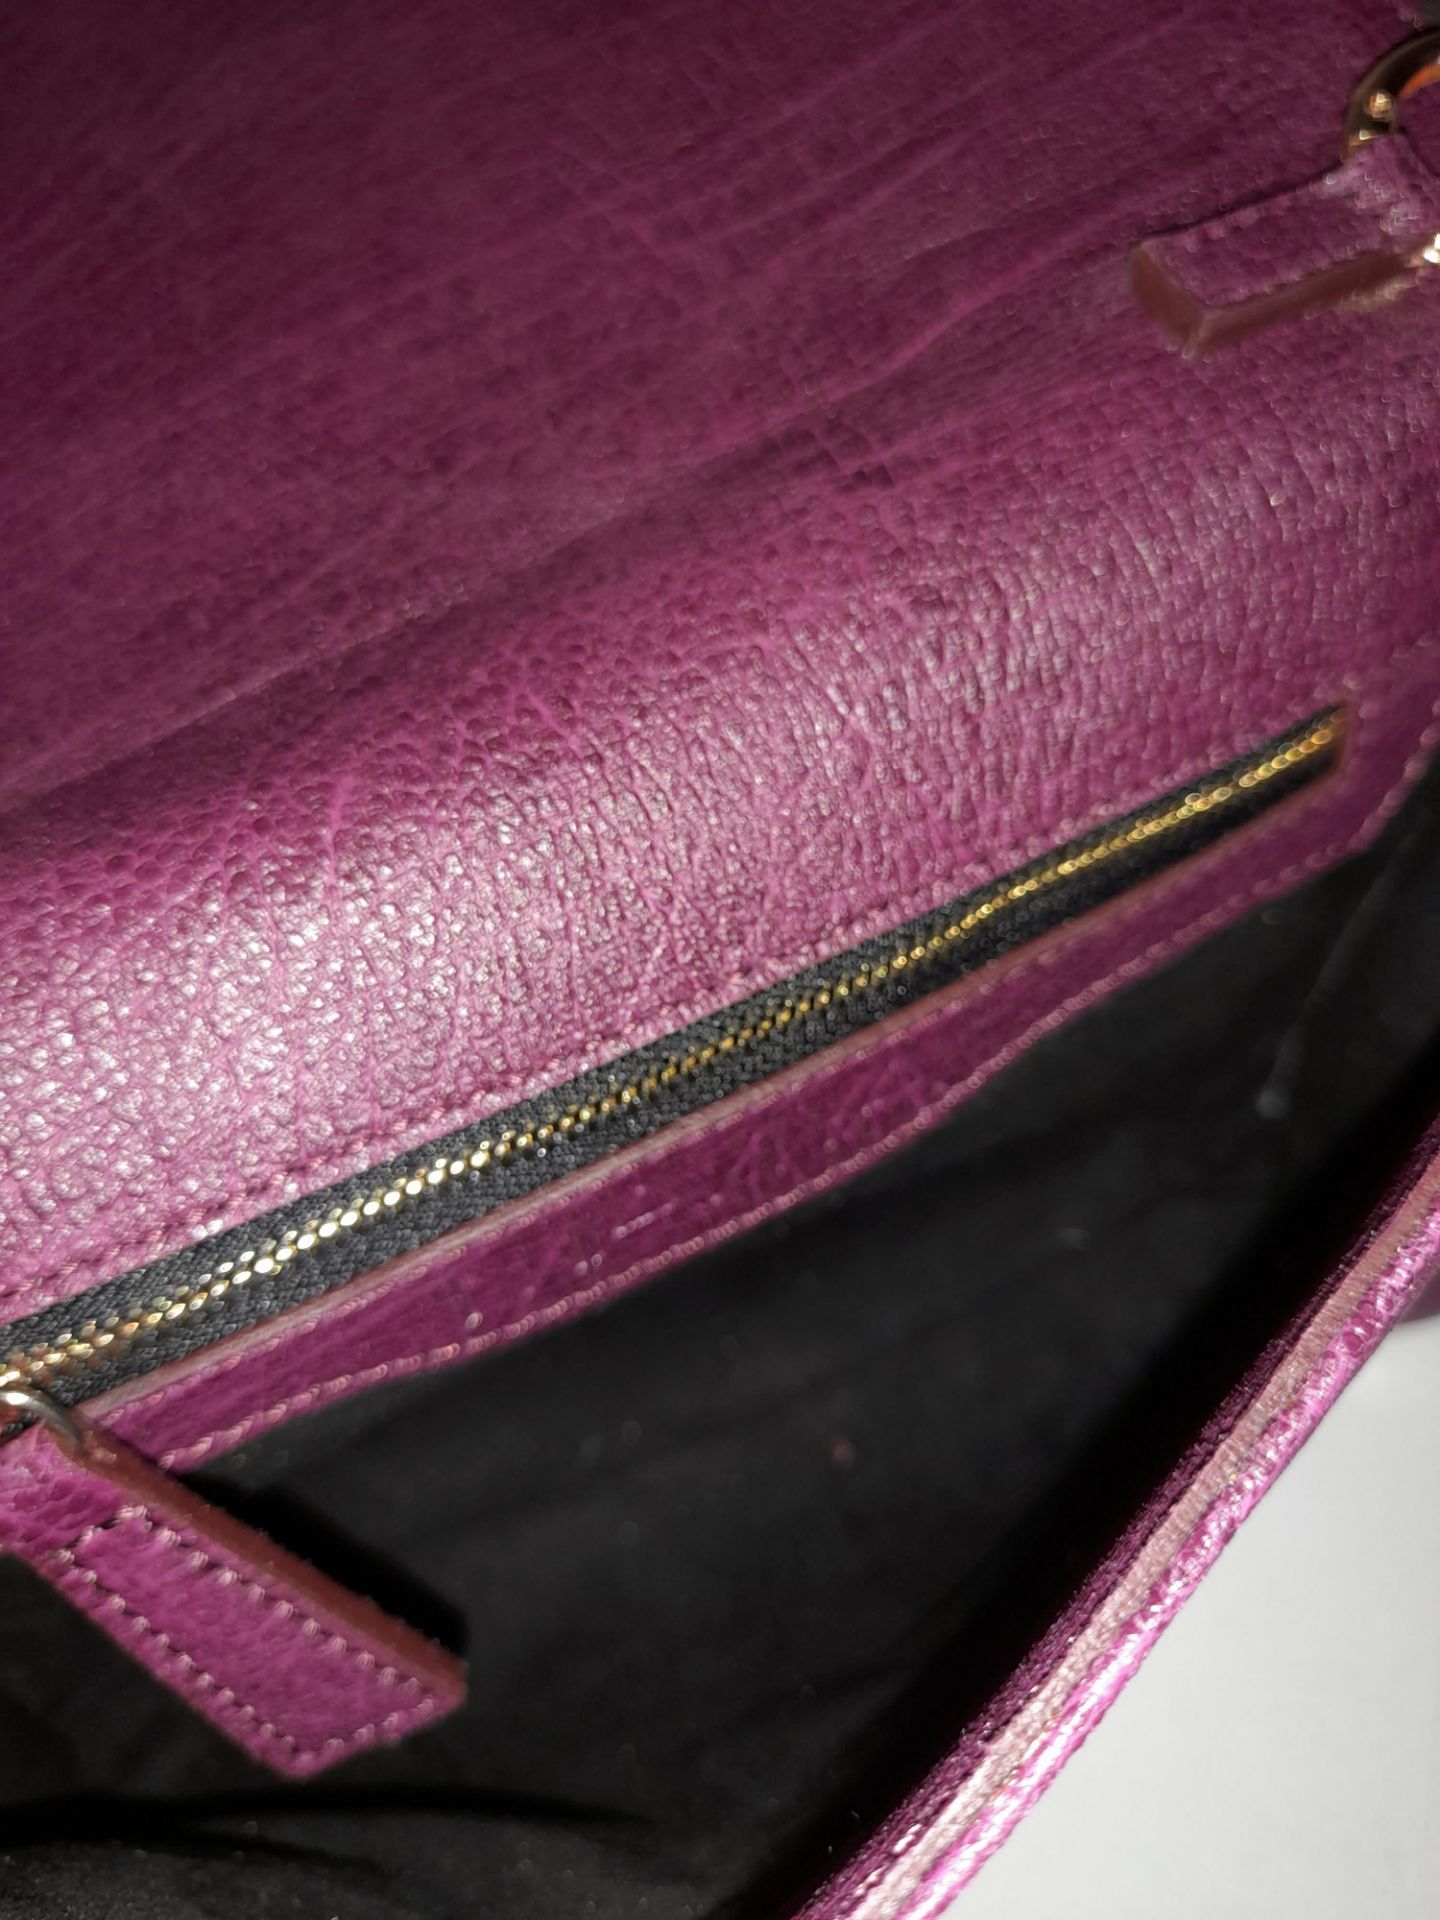 Maviya “Mannie” Purple Vegan Italian Leather Evening Clutch Bag with Grained Finish, Faux Suede - Image 2 of 2